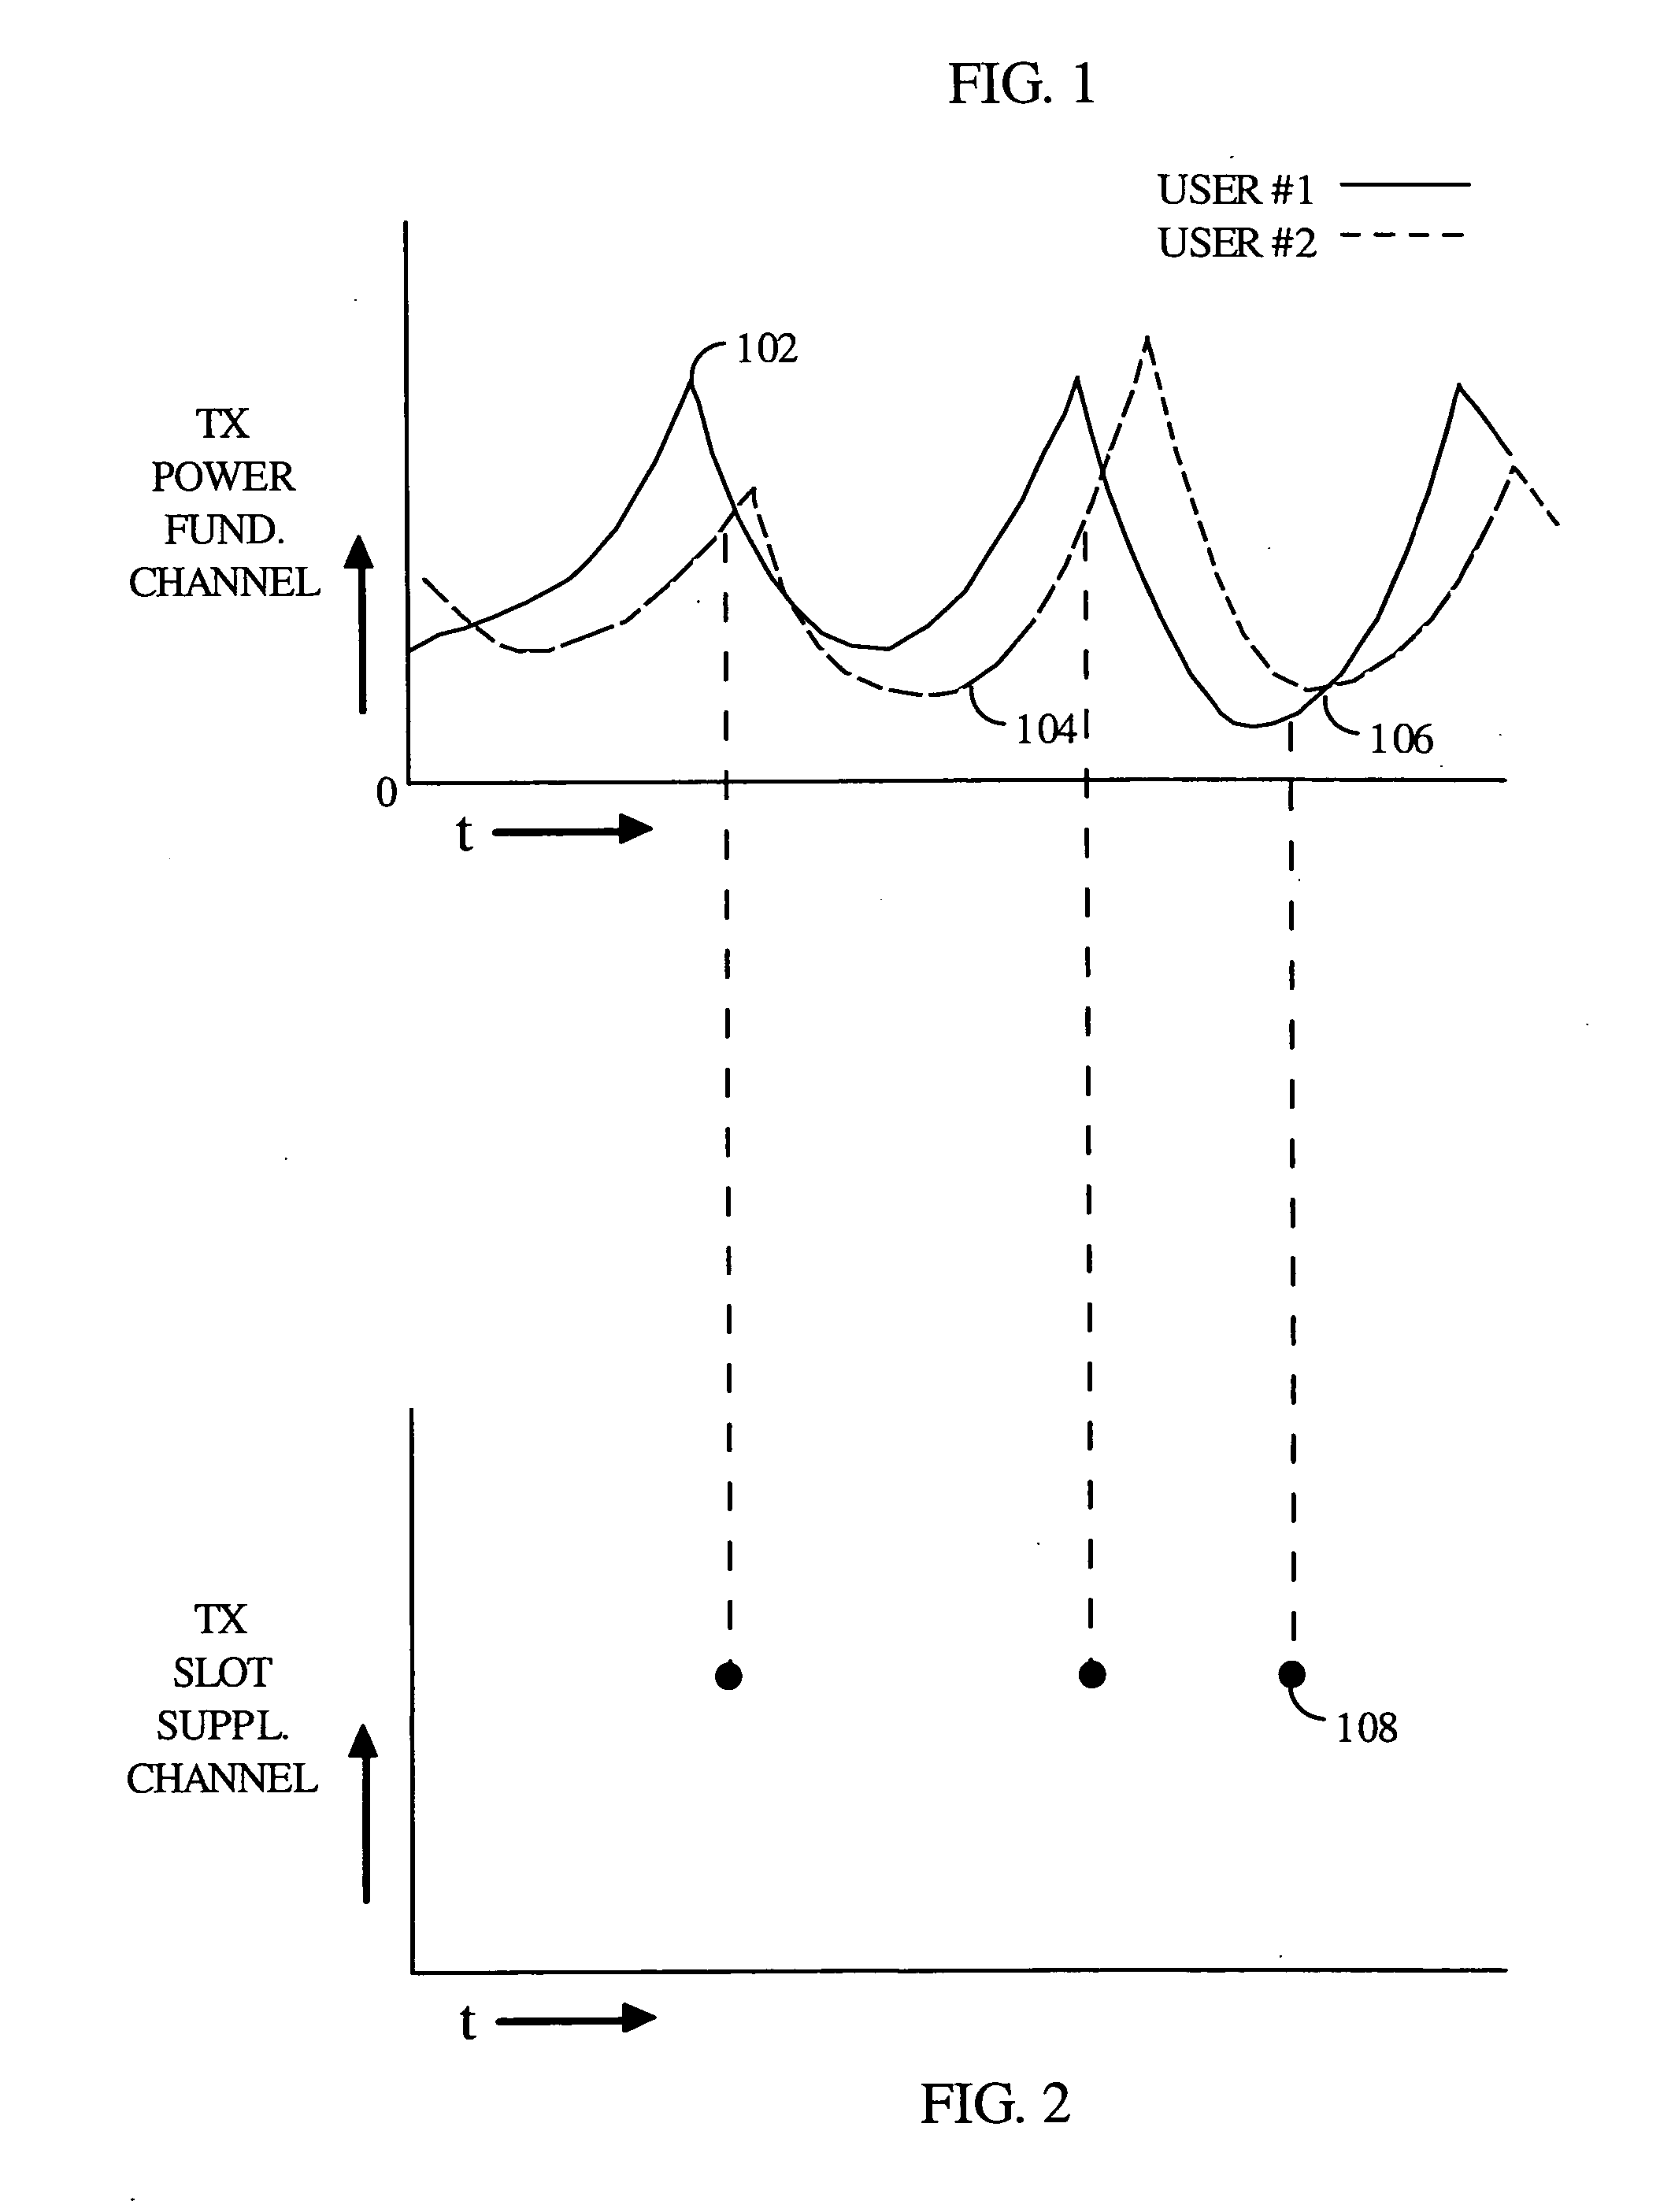 Forward-link scheduling in a wireless communication system